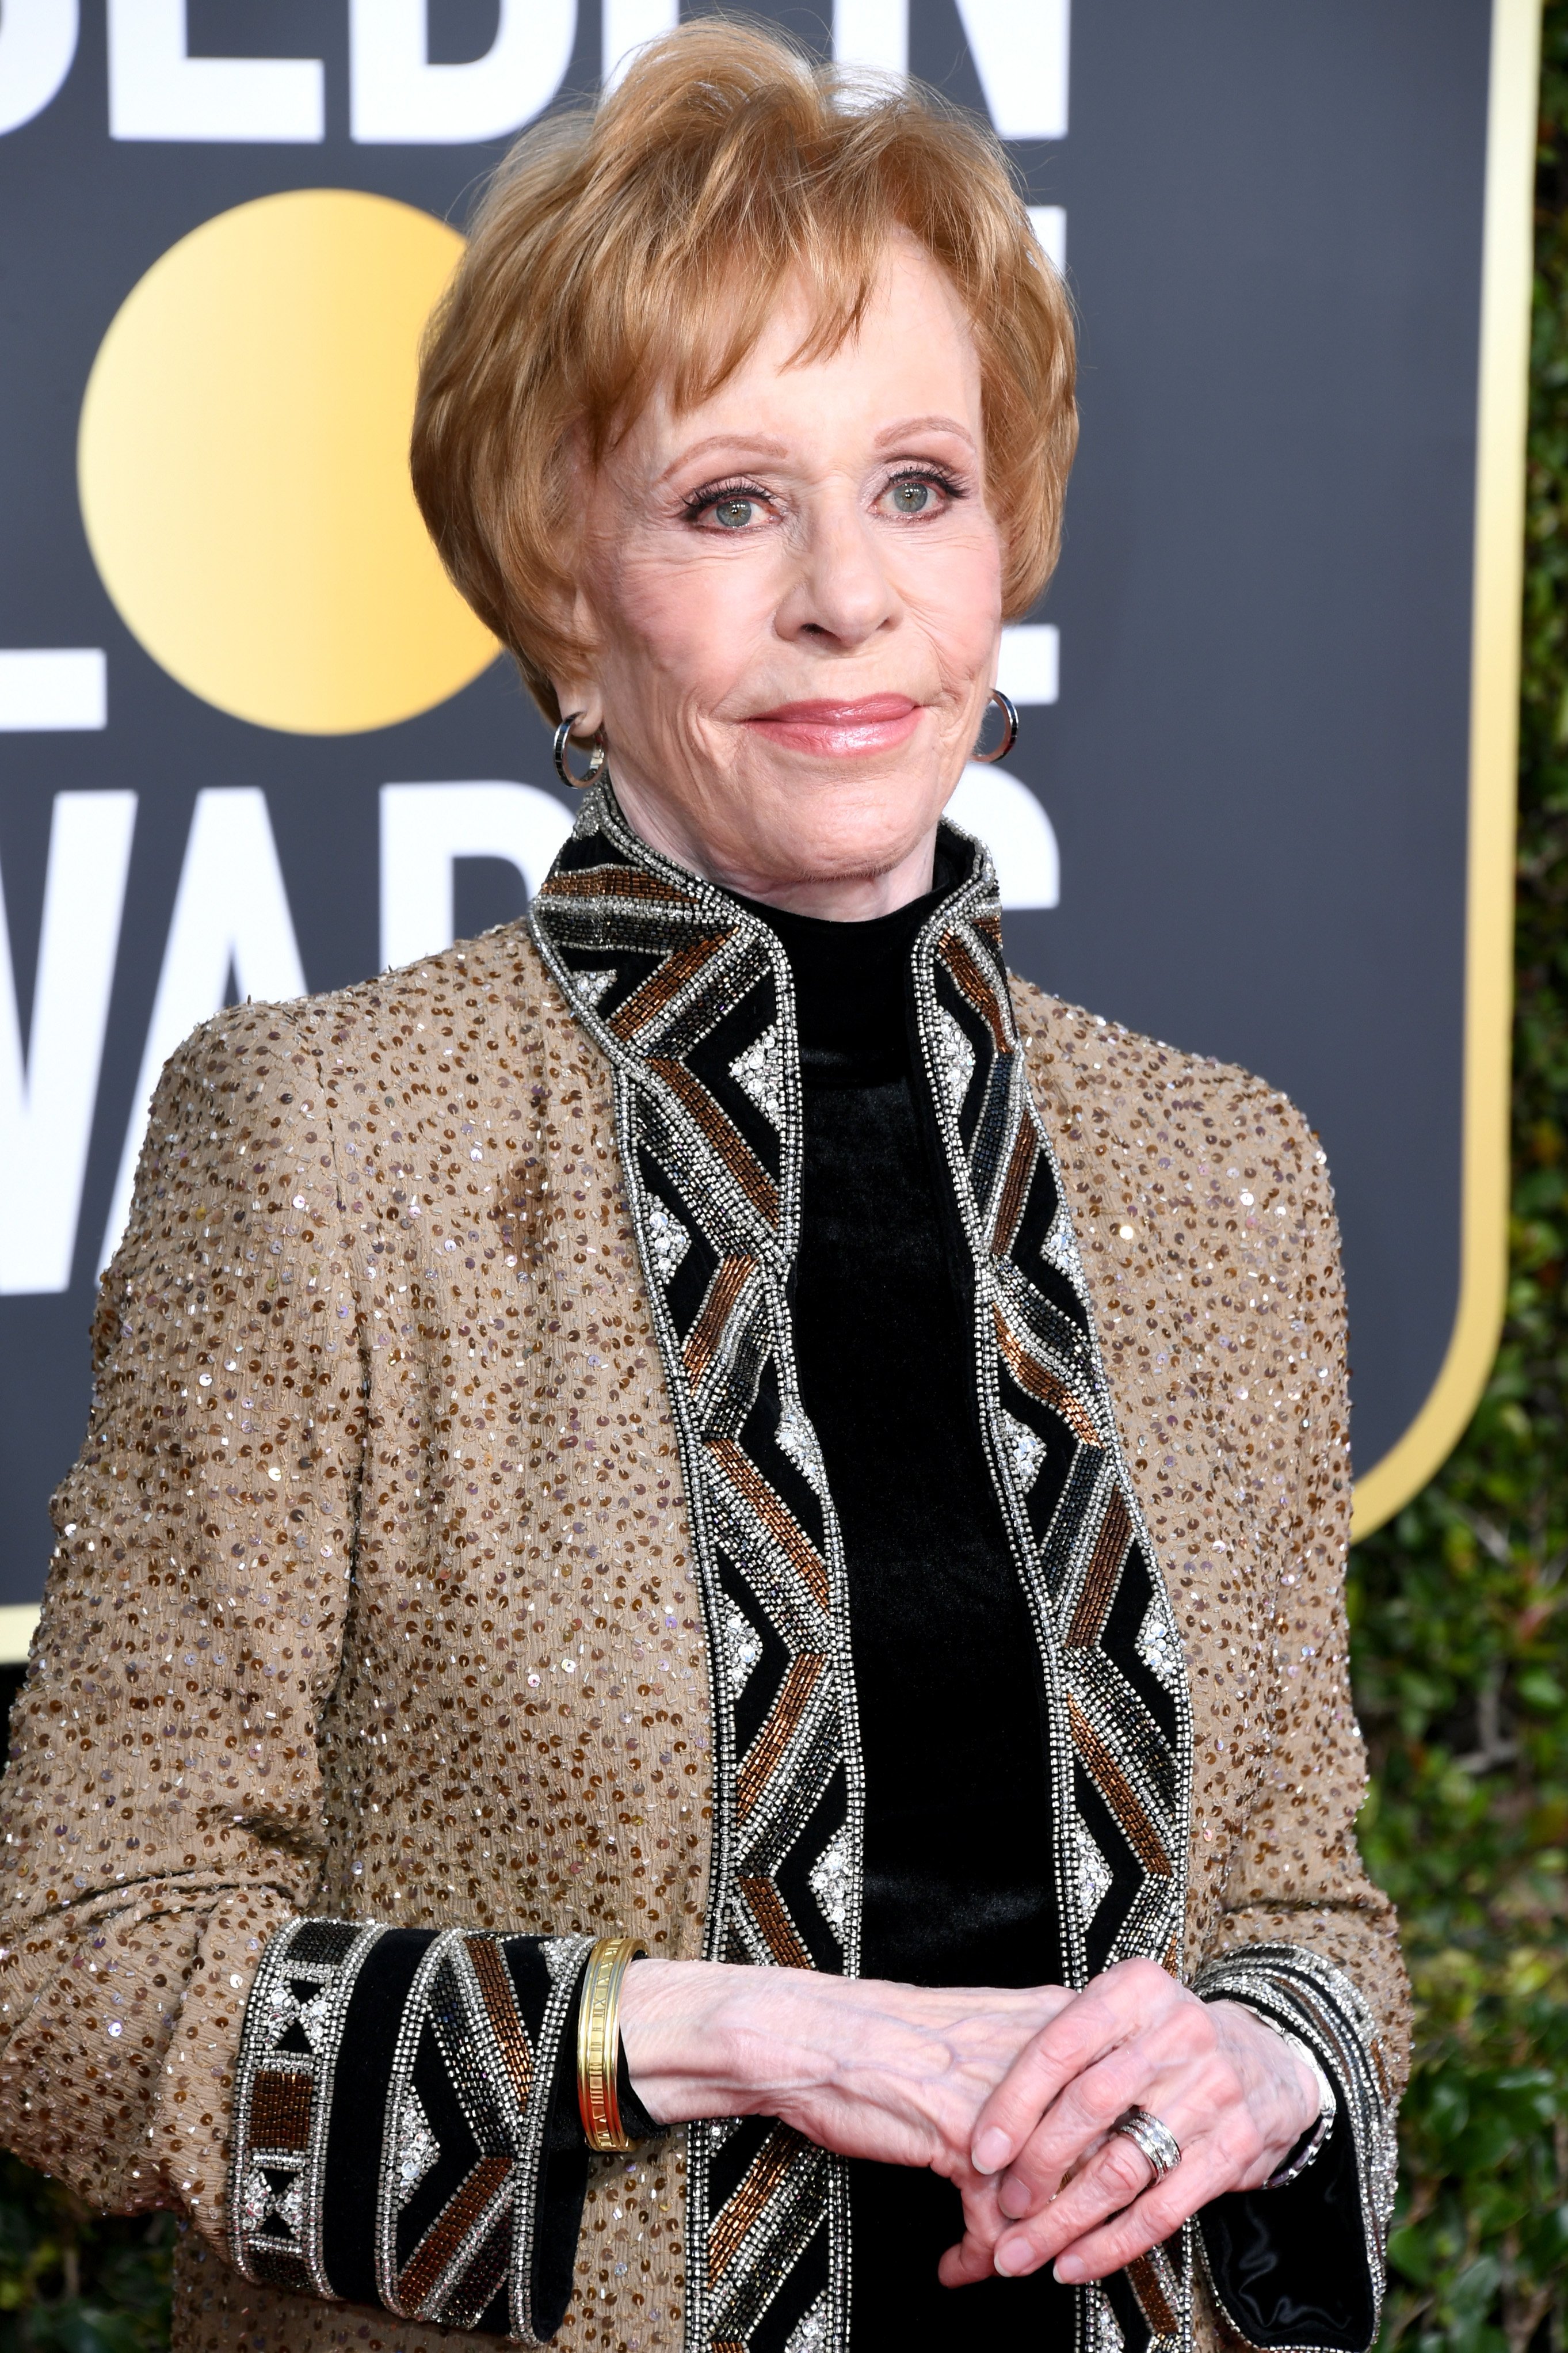 Carol Burnett attends the 76th Annual Golden Globe Awards at The Beverly Hilton Hotel on January 6, 2019 in Beverly Hills, California | Photo: Getty Images